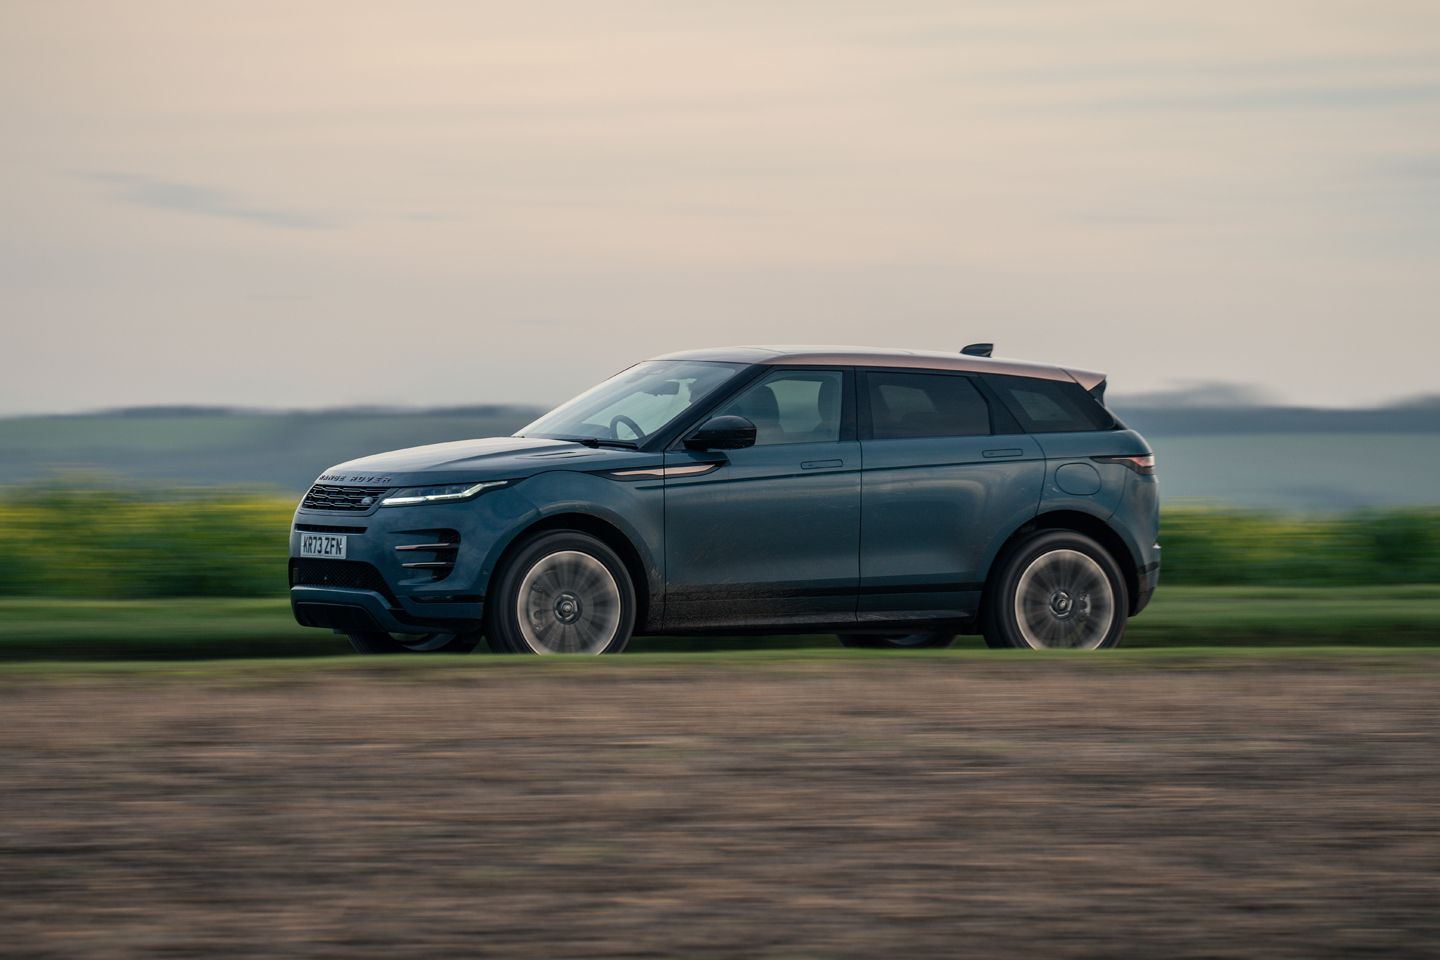 Range Rover Evoque 2022: Perfectly Blending Luxury, Capability and